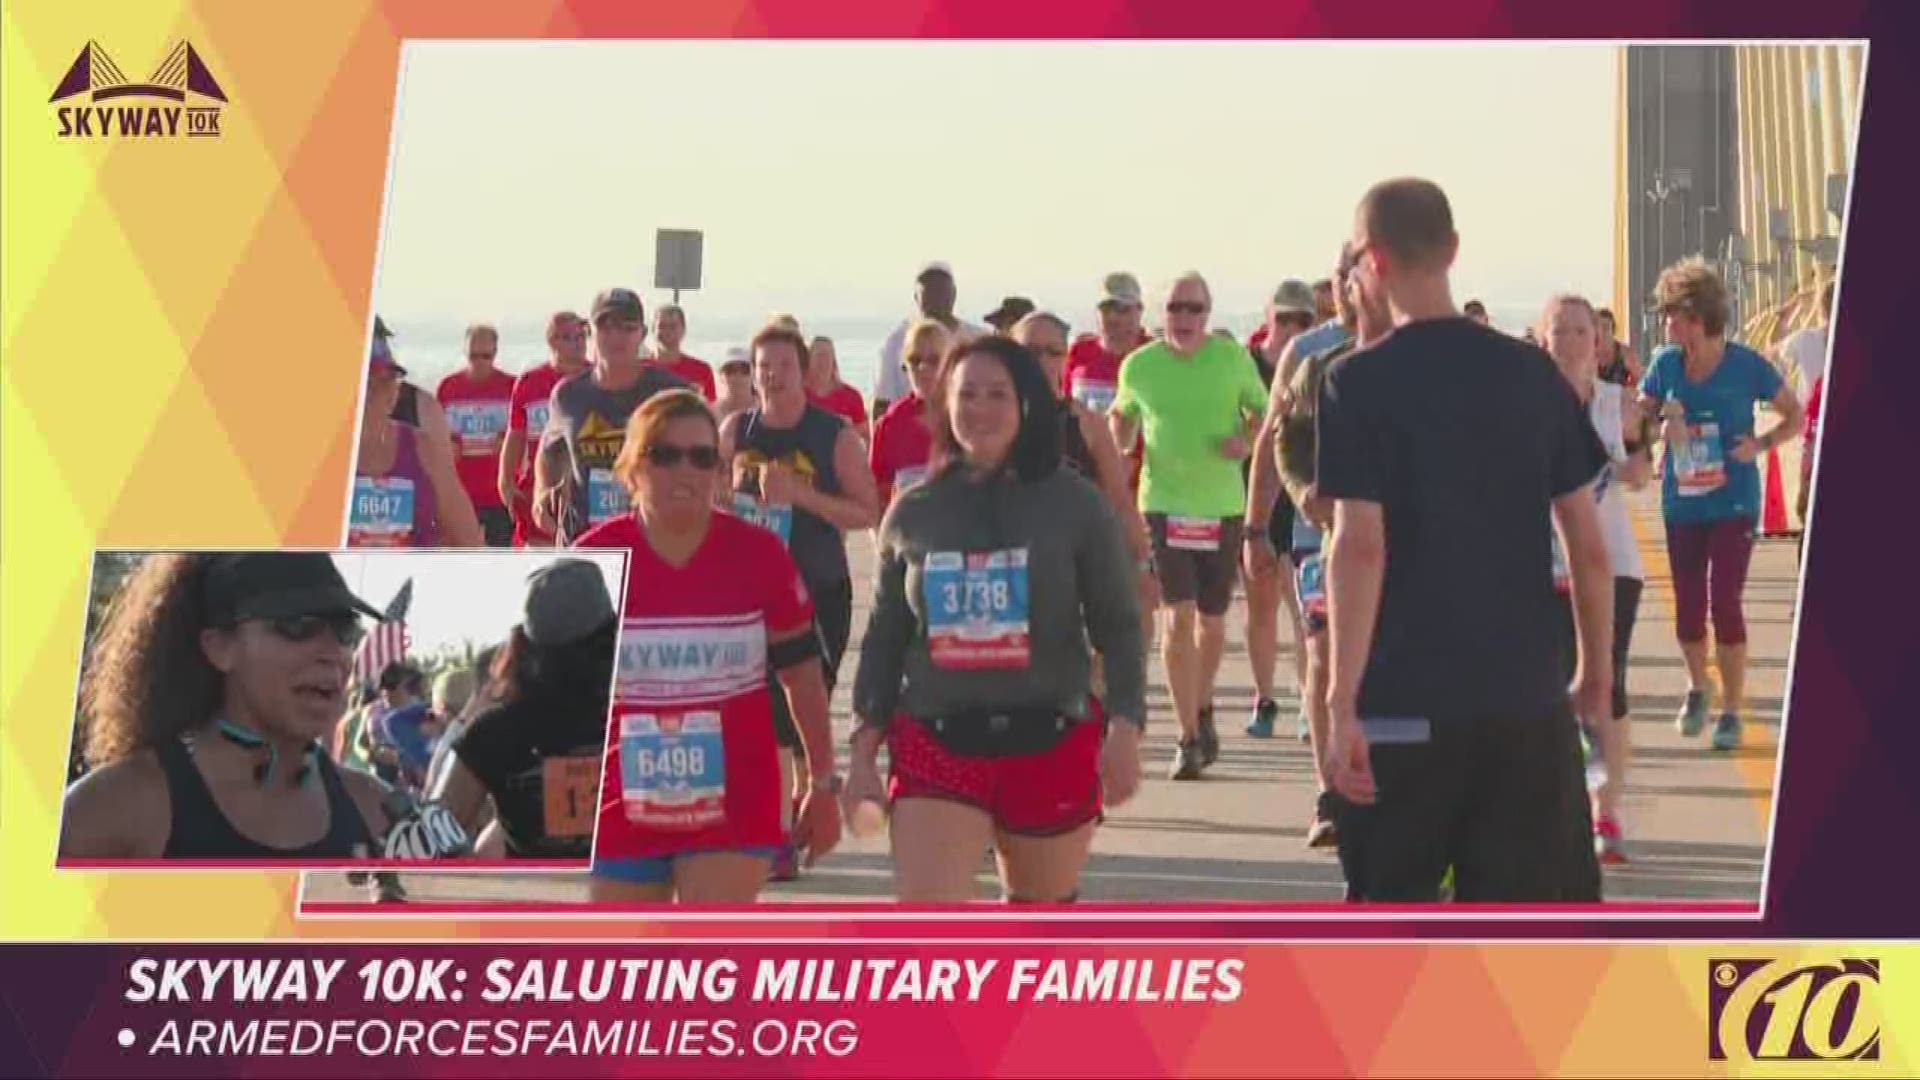 One runner in the Skyway 10K said she teared up at the top of the bridge as she saw the troops and flags.